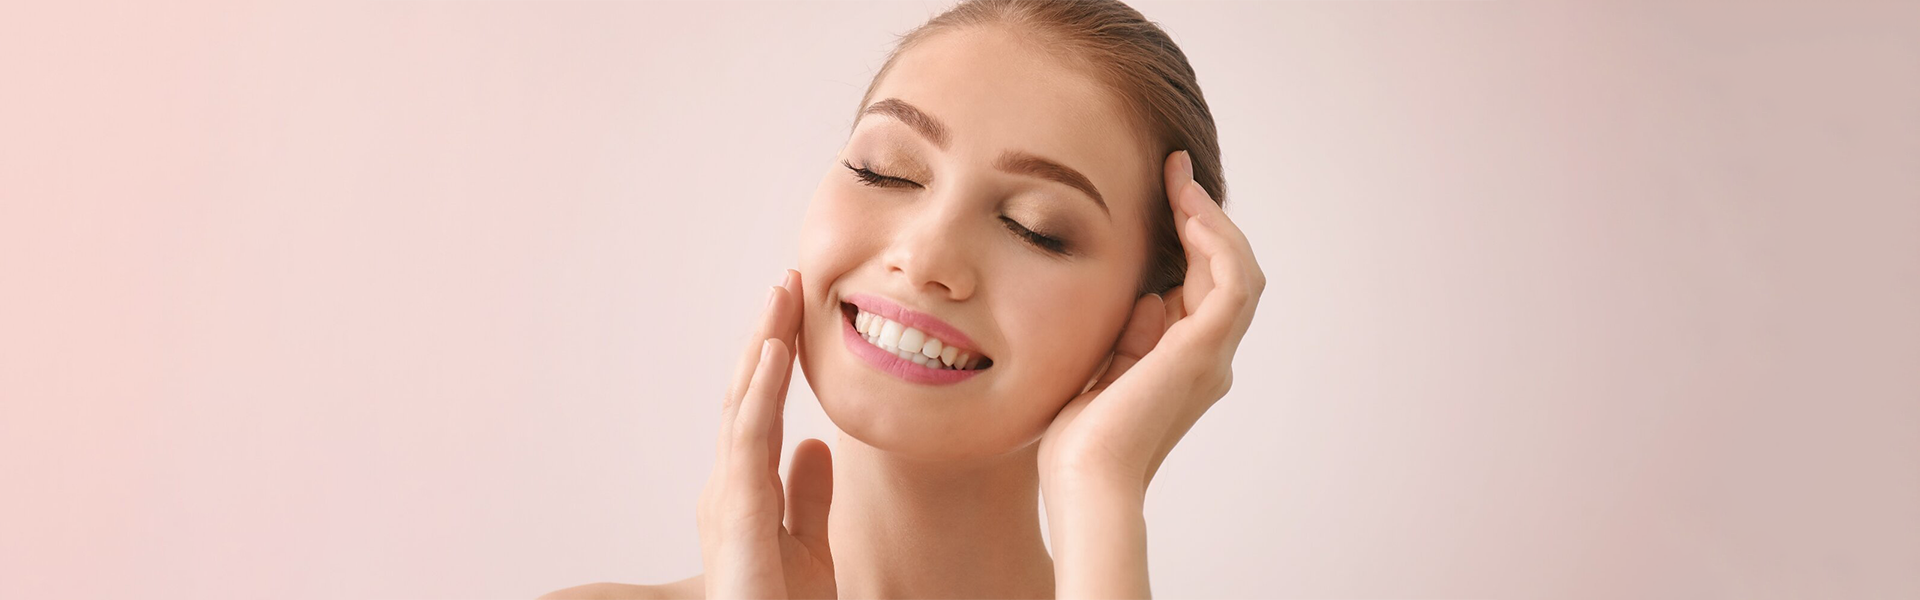 Cosmetic Dentistry Vancouver Caring for Your Aesthetic Requirements Excellently